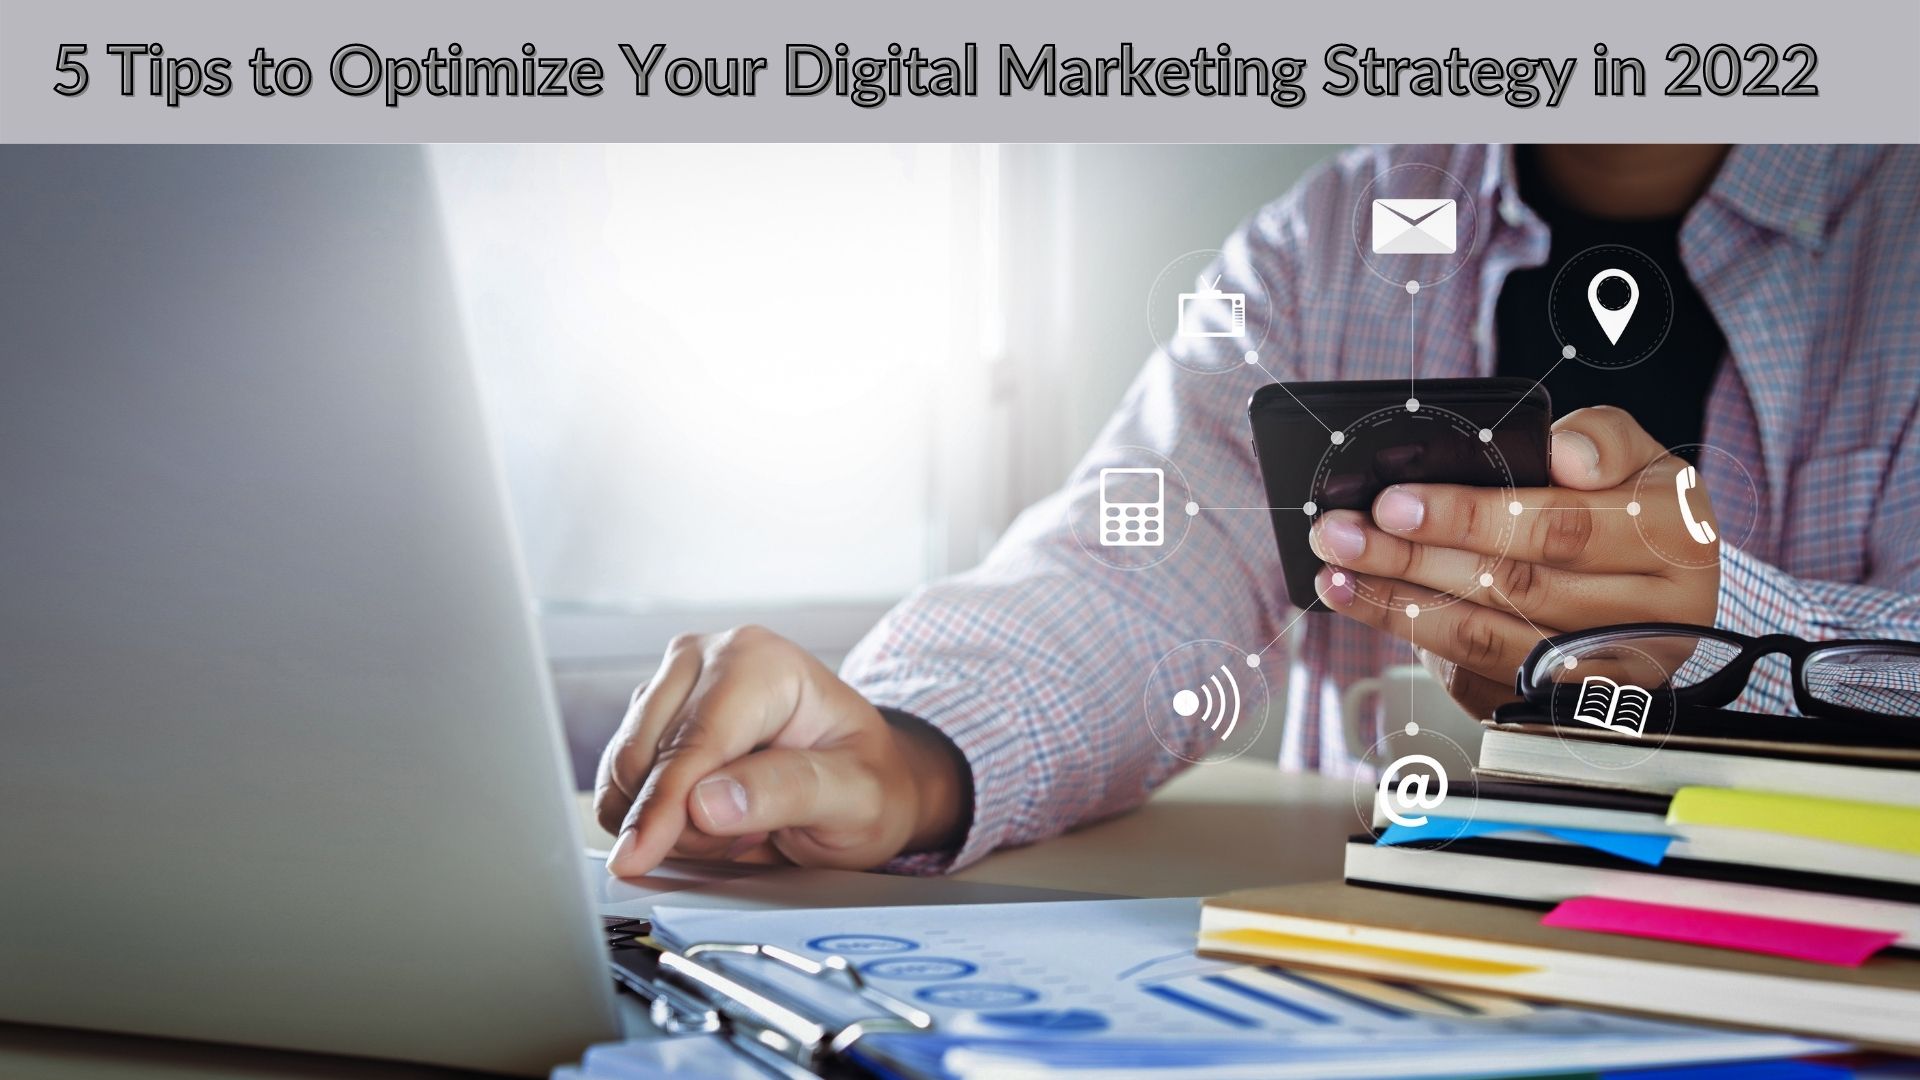 5 Tips to Optimize Your Digital Marketing Strategy